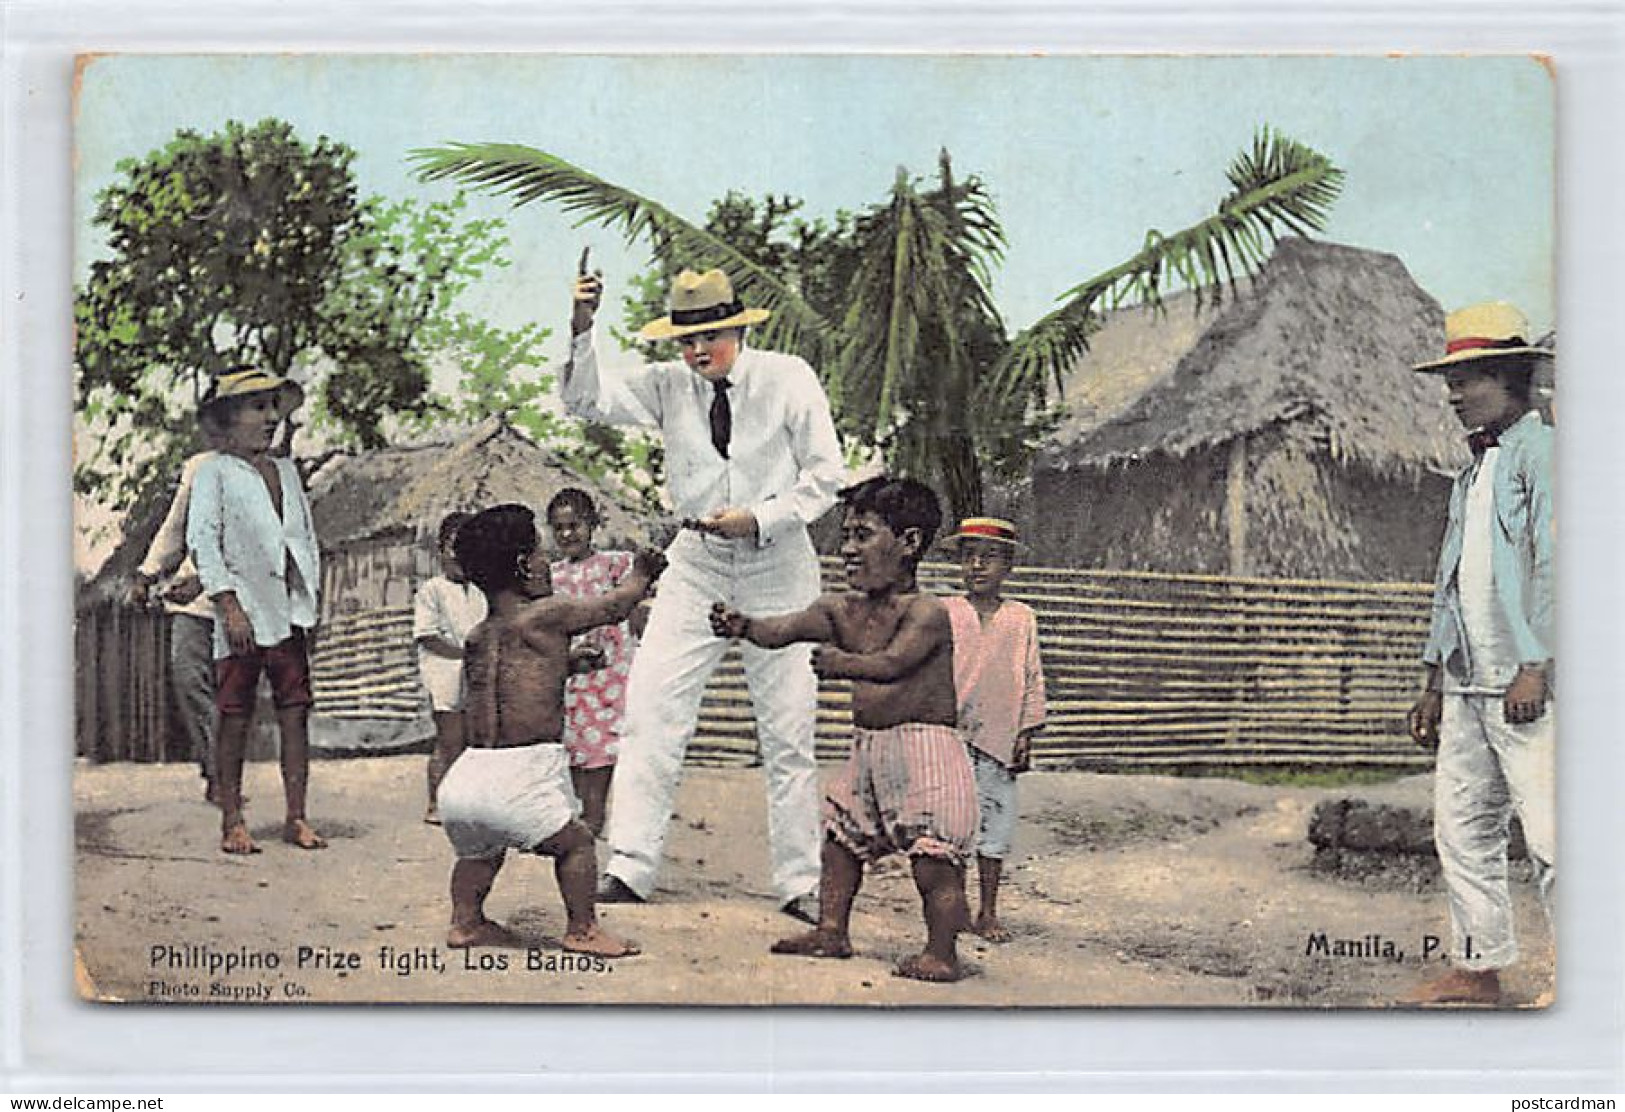 Philippines - LOS BANOS - Dwarf - Philippino Prize Fight - Publ. Photo Supply Co.  - Philippines